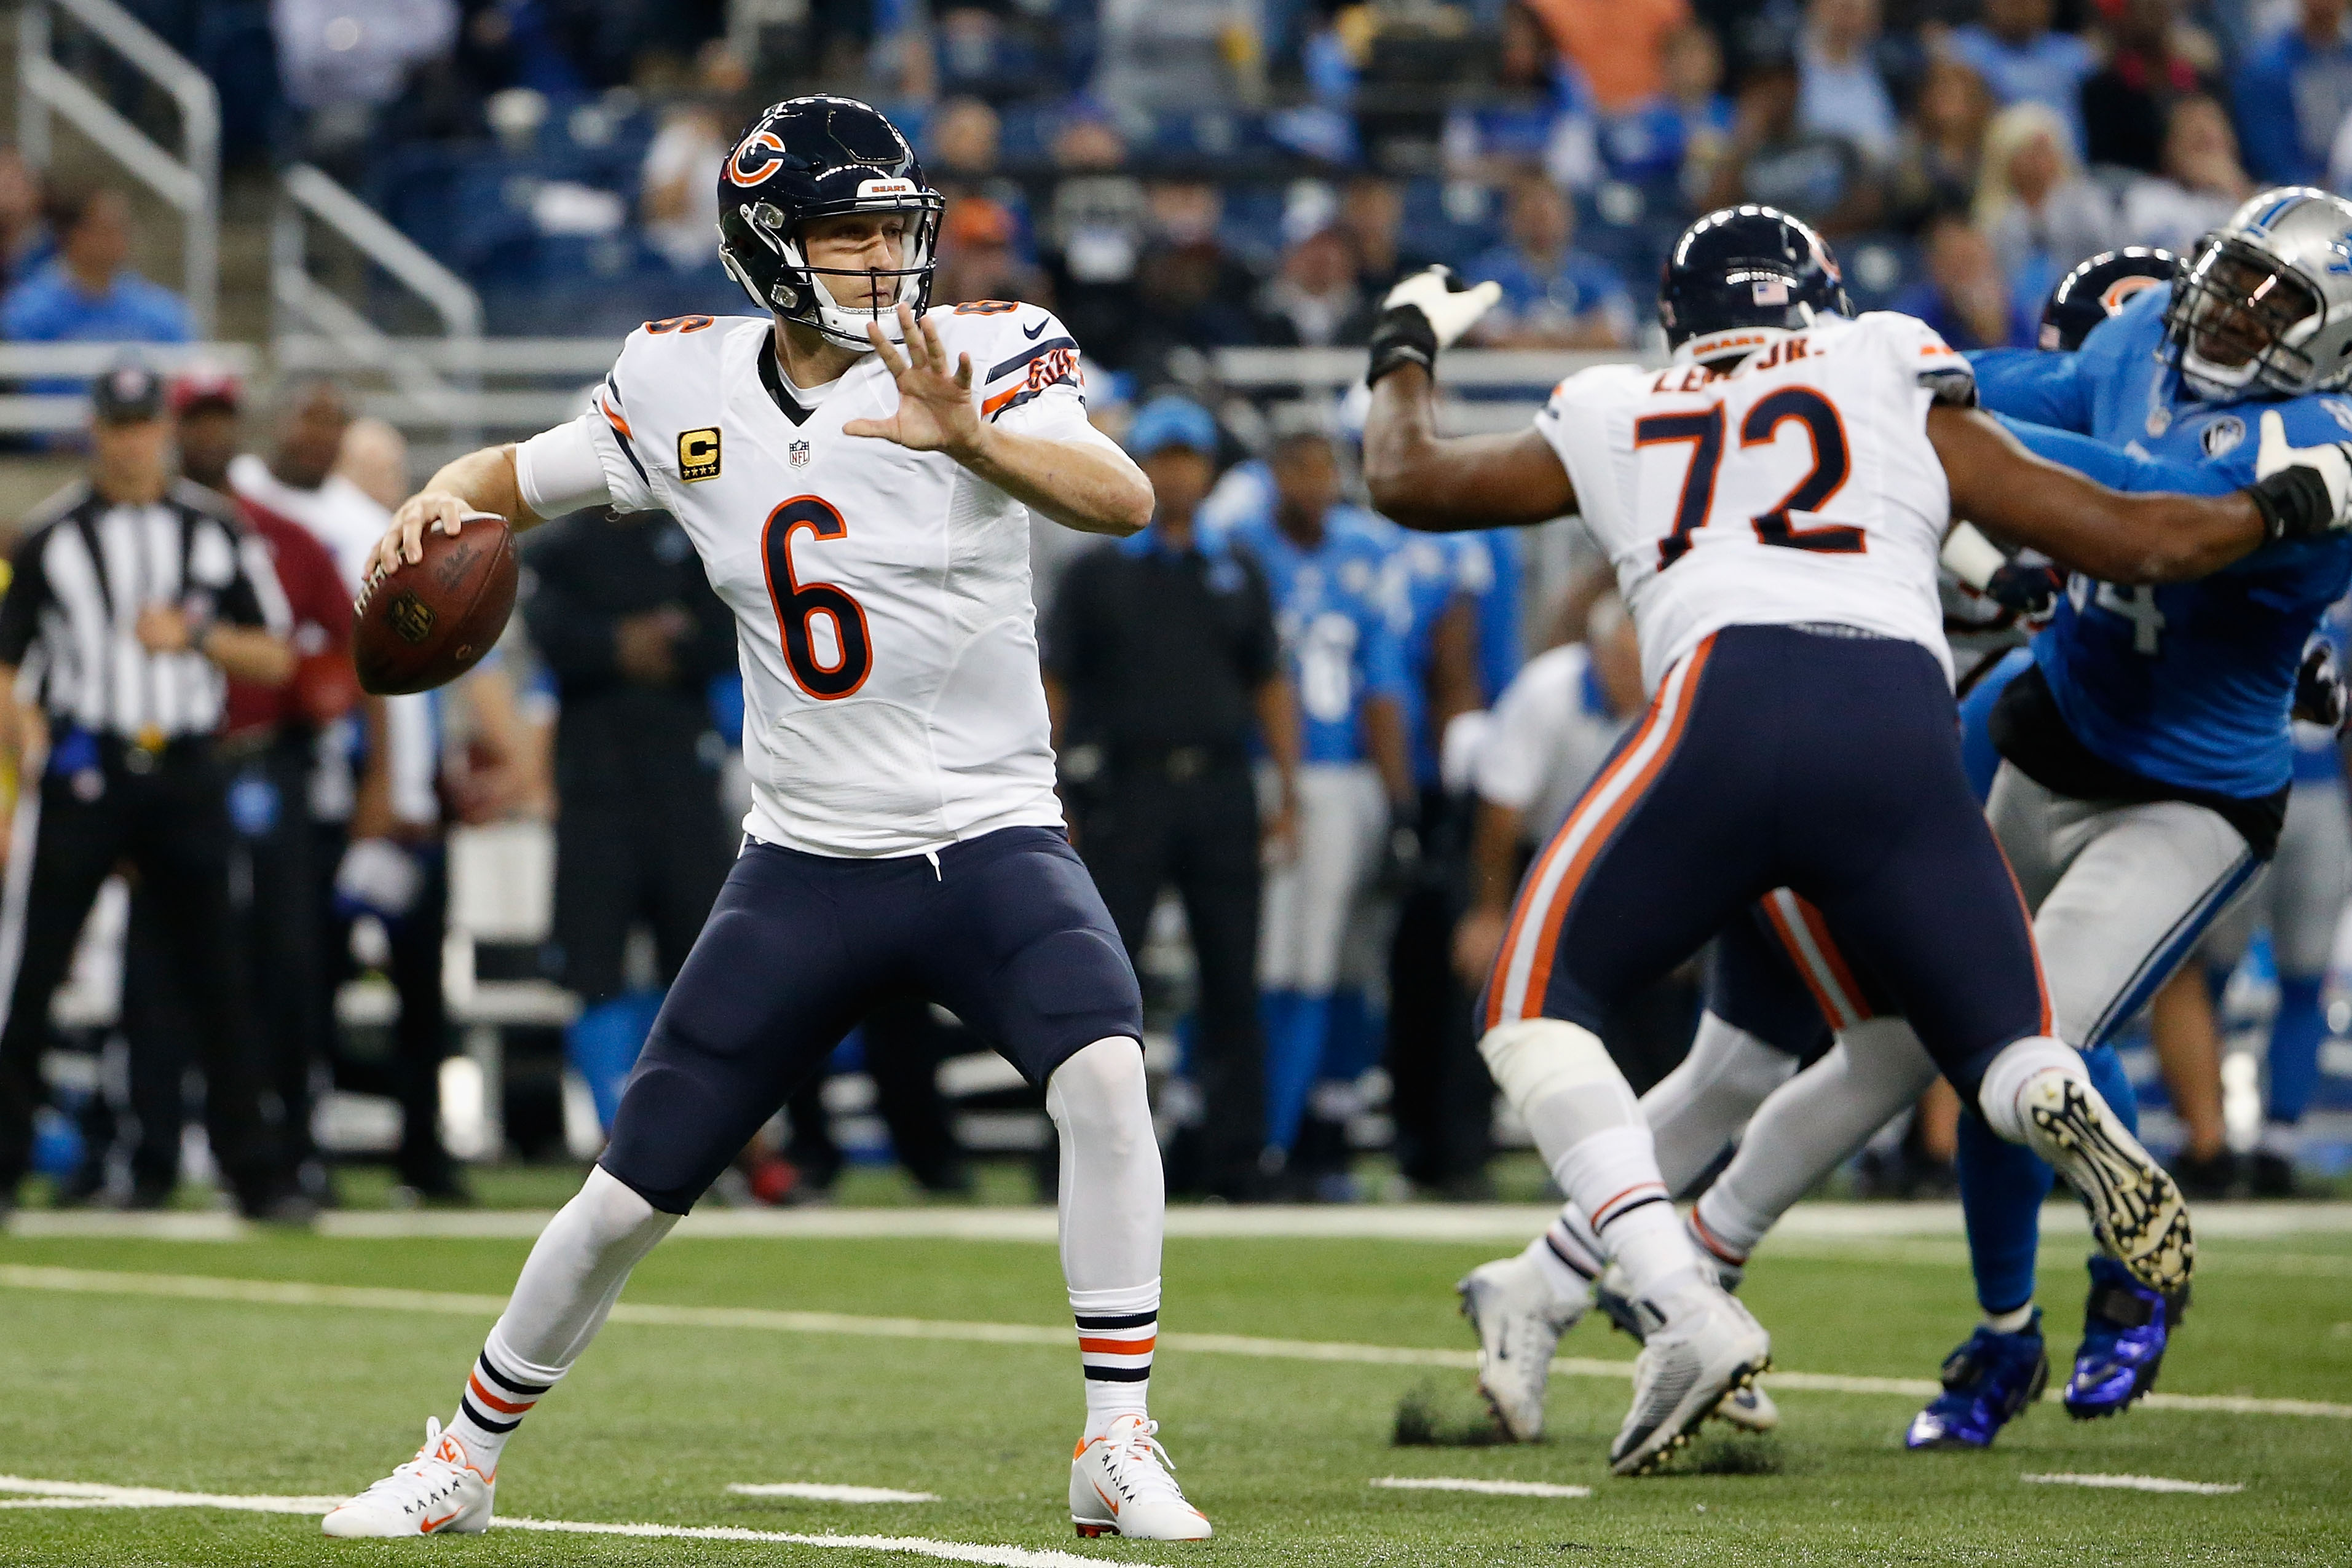 Jay Cutler and the Bears have limped to 2-4 this season. (Getty)